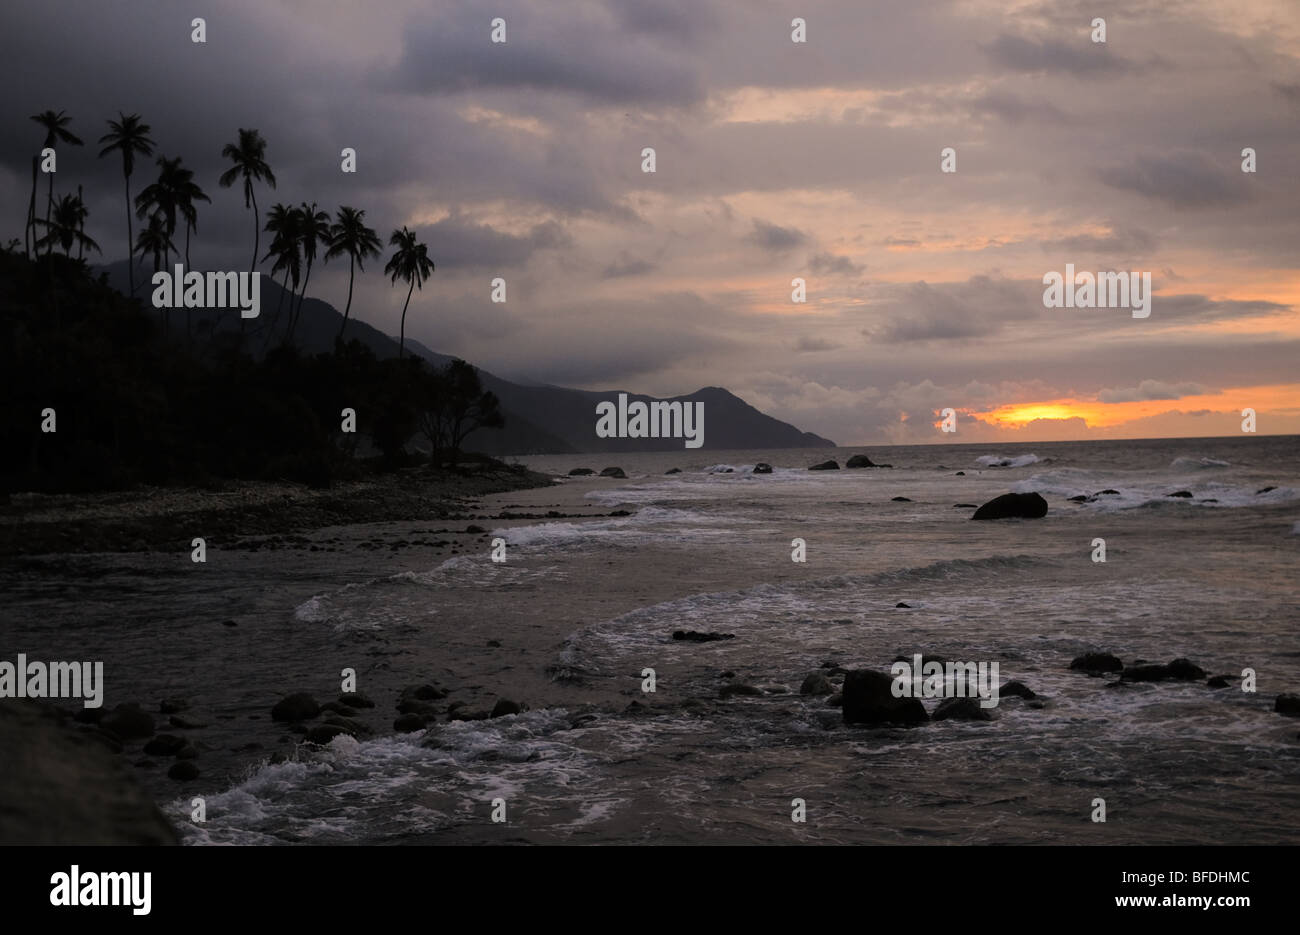 The sun sets over a rocky beach lined with mountains and palm trees in Puerto Colombia, Venezuela. Stock Photo